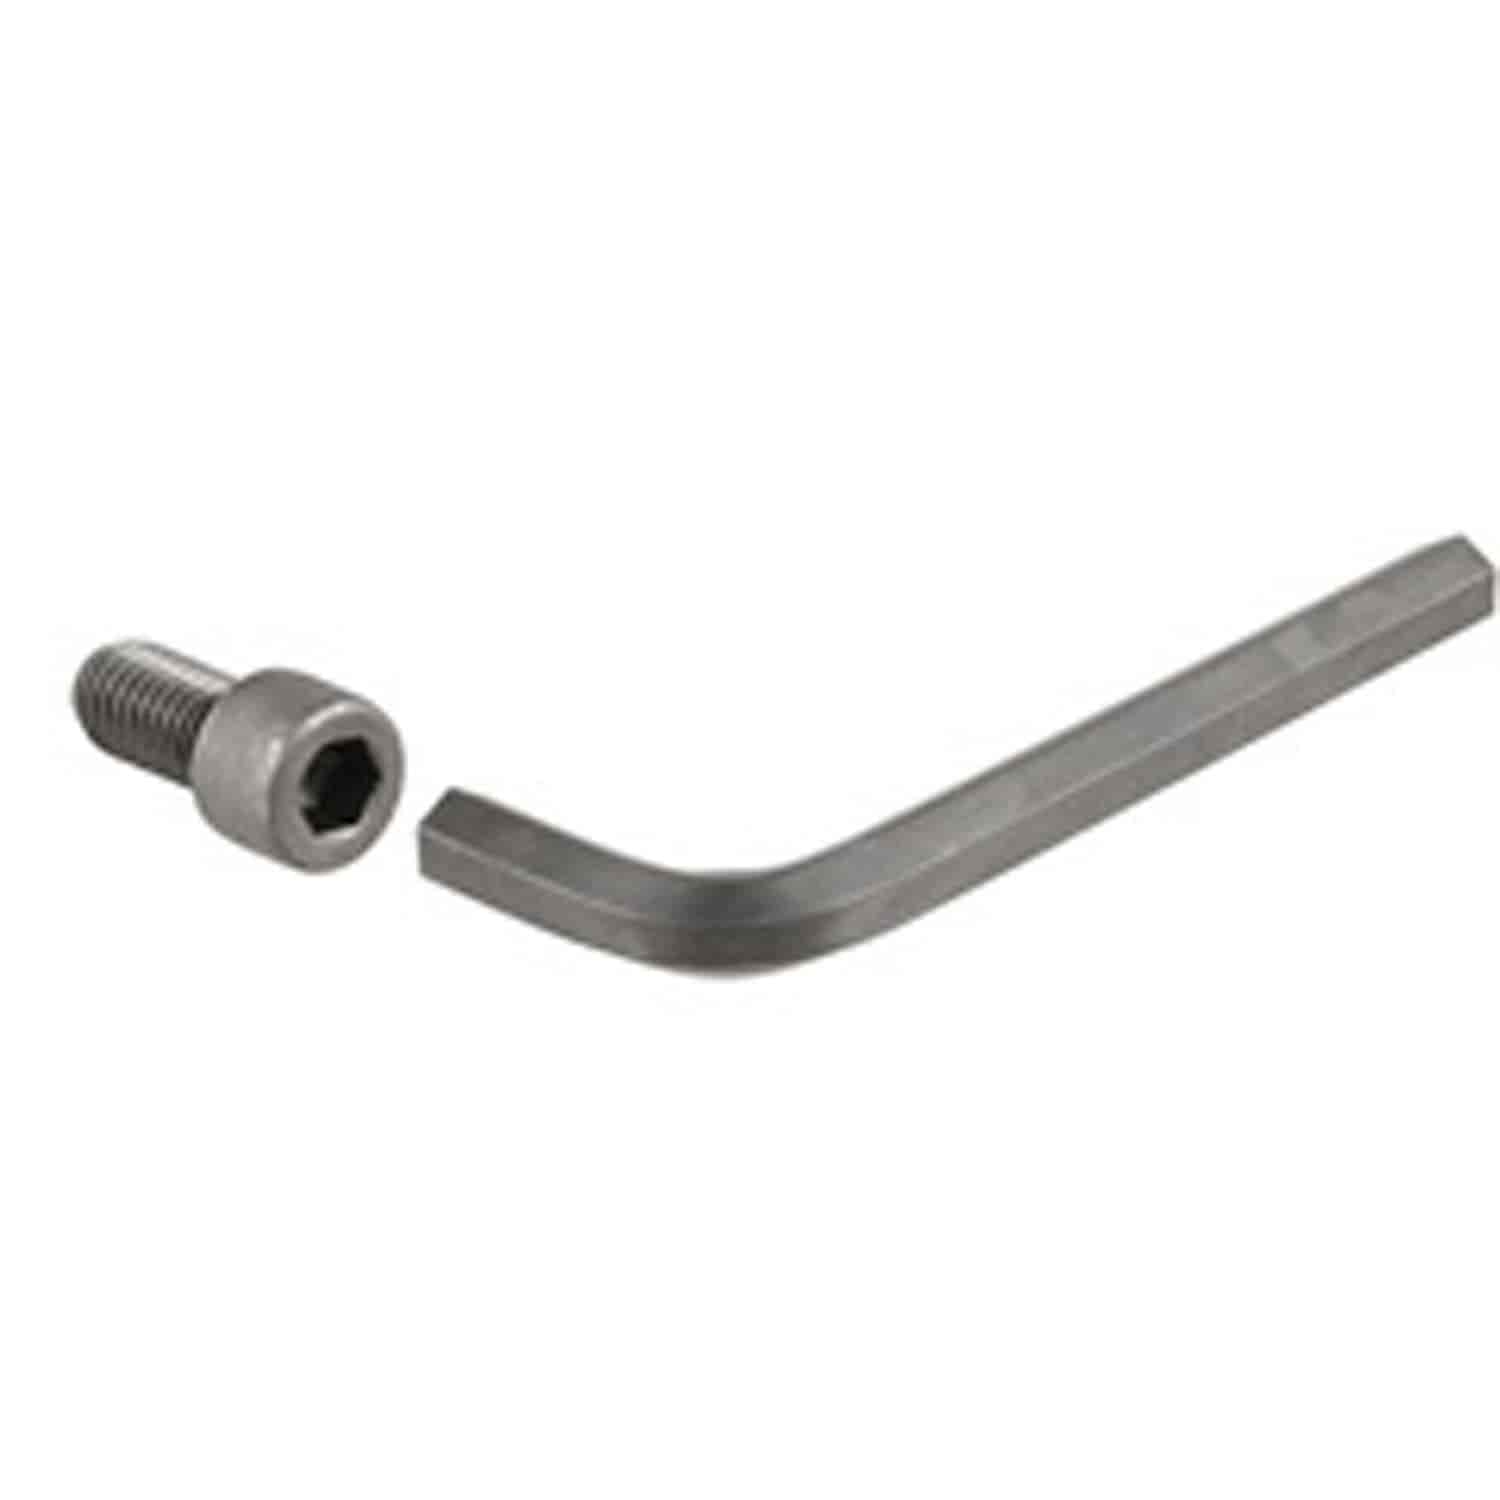 ANTI-RATTLE SET SCREW WITH WRENCH